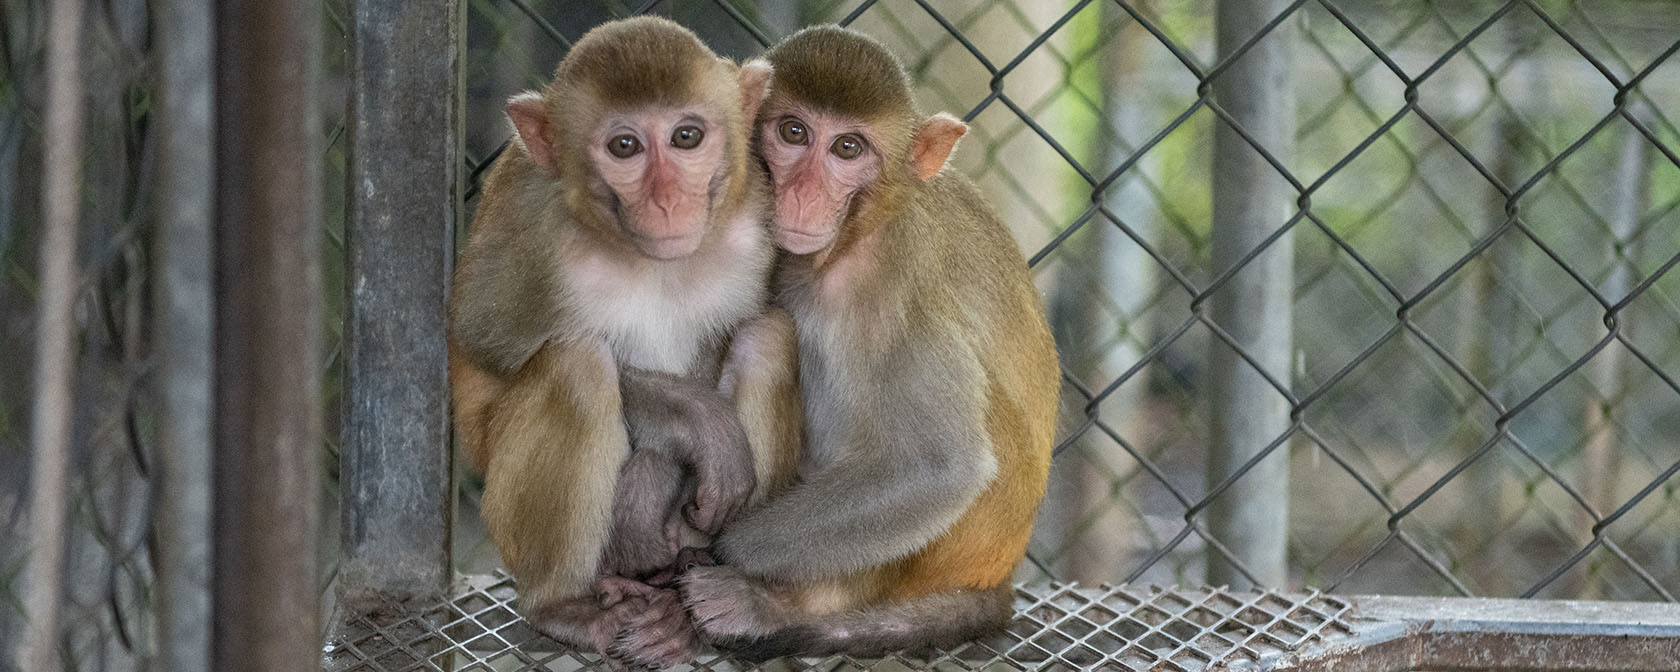 Our fight against expanded use of monkeys in research heats up